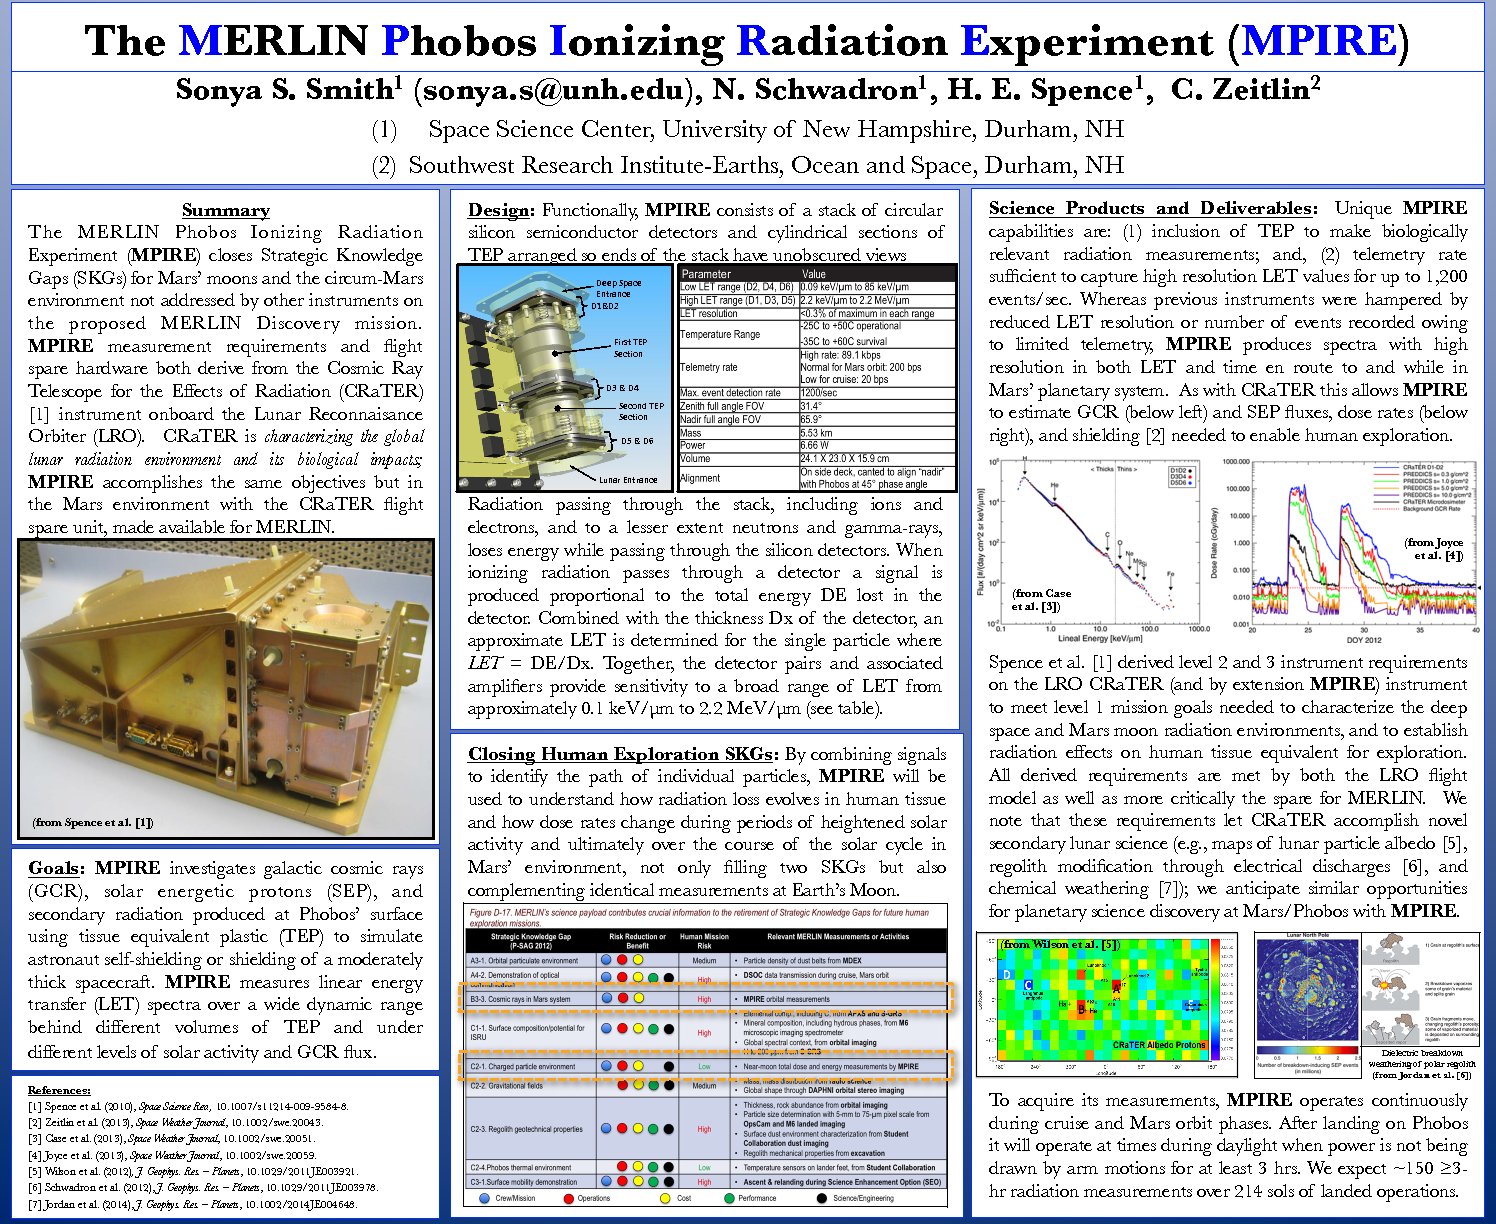 The Merlin Phobos Ionizing Radiation Experiment (Mpire) by hspence